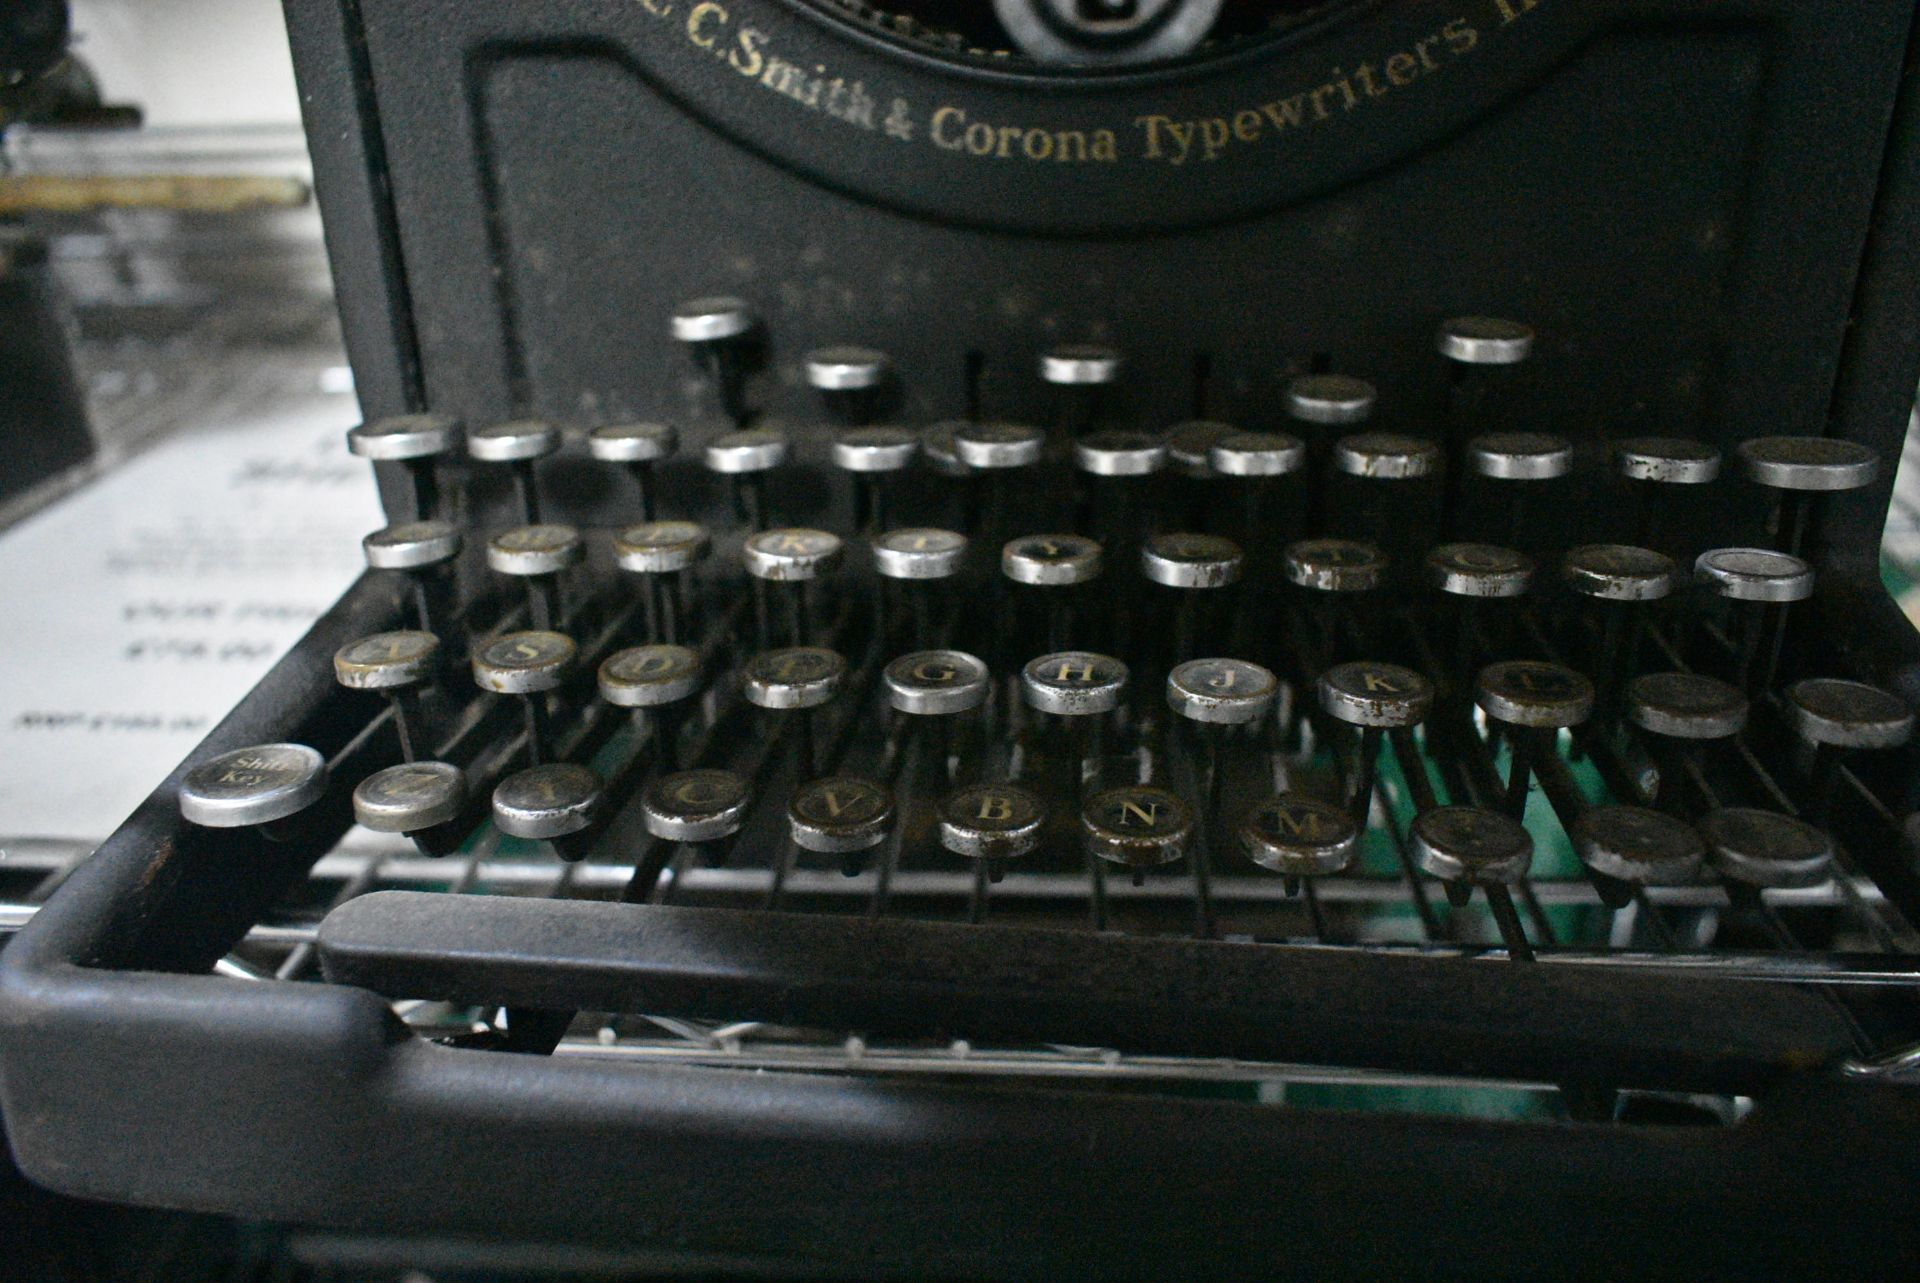 L C Smith & Corona Typewriter (note this lot is no - Image 5 of 5